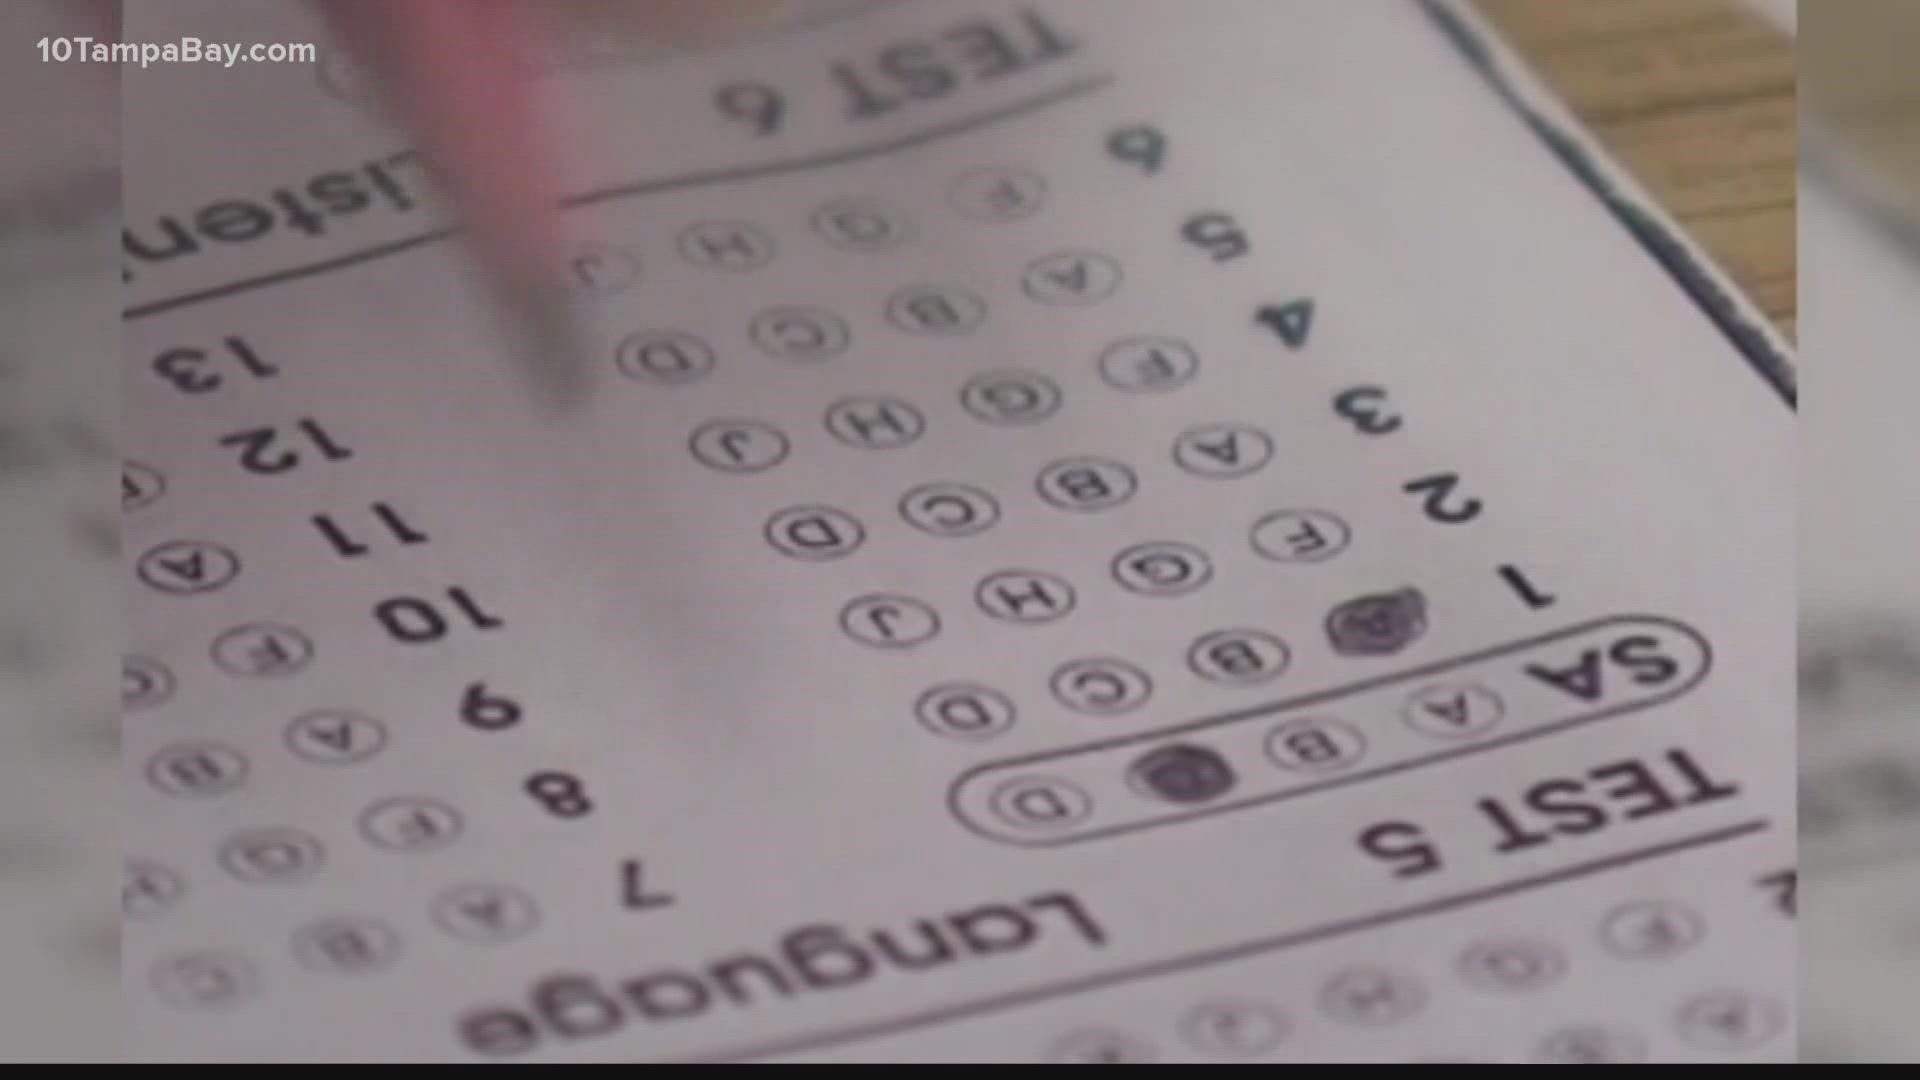 Gov. Ron DeSantis announced Tuesday that Florida would end its primary statewide standardized test in schools after this year.